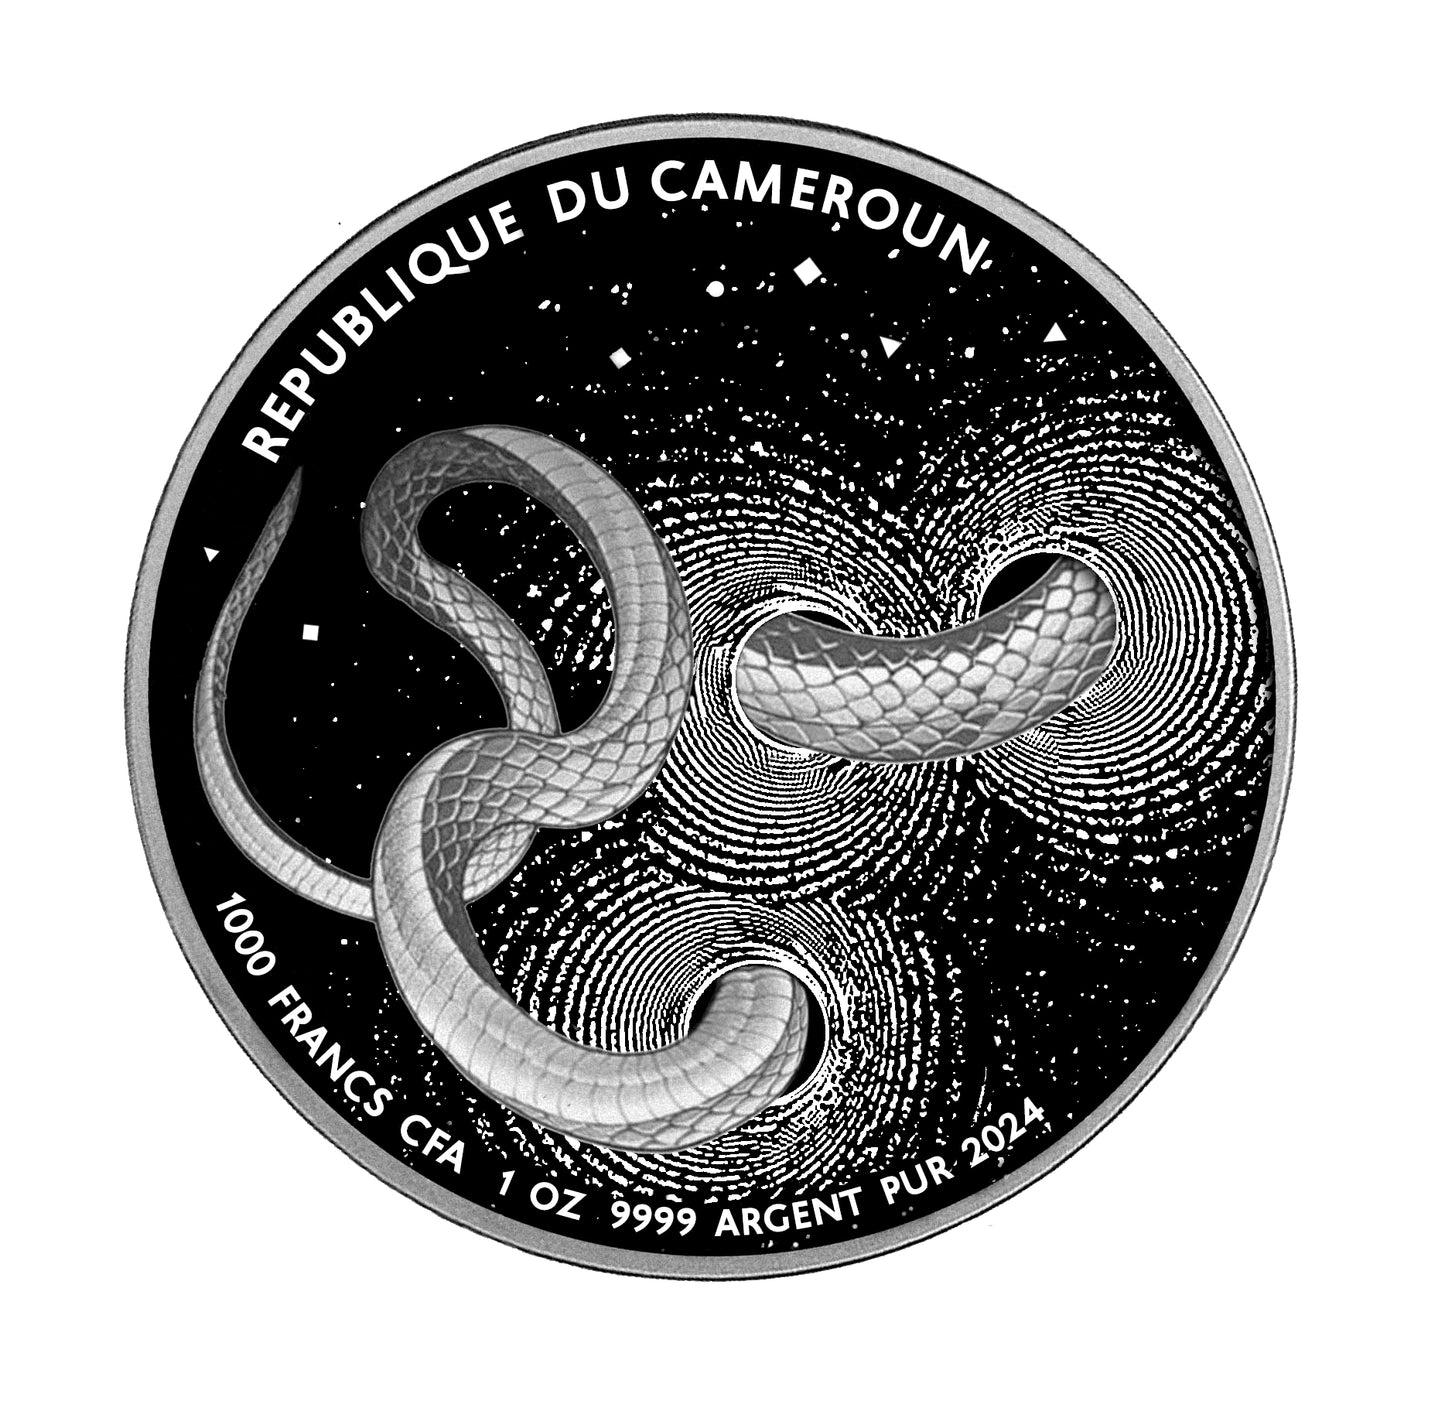 Snake Cameroon Coin 1 Oz Silver Le Grand Mint